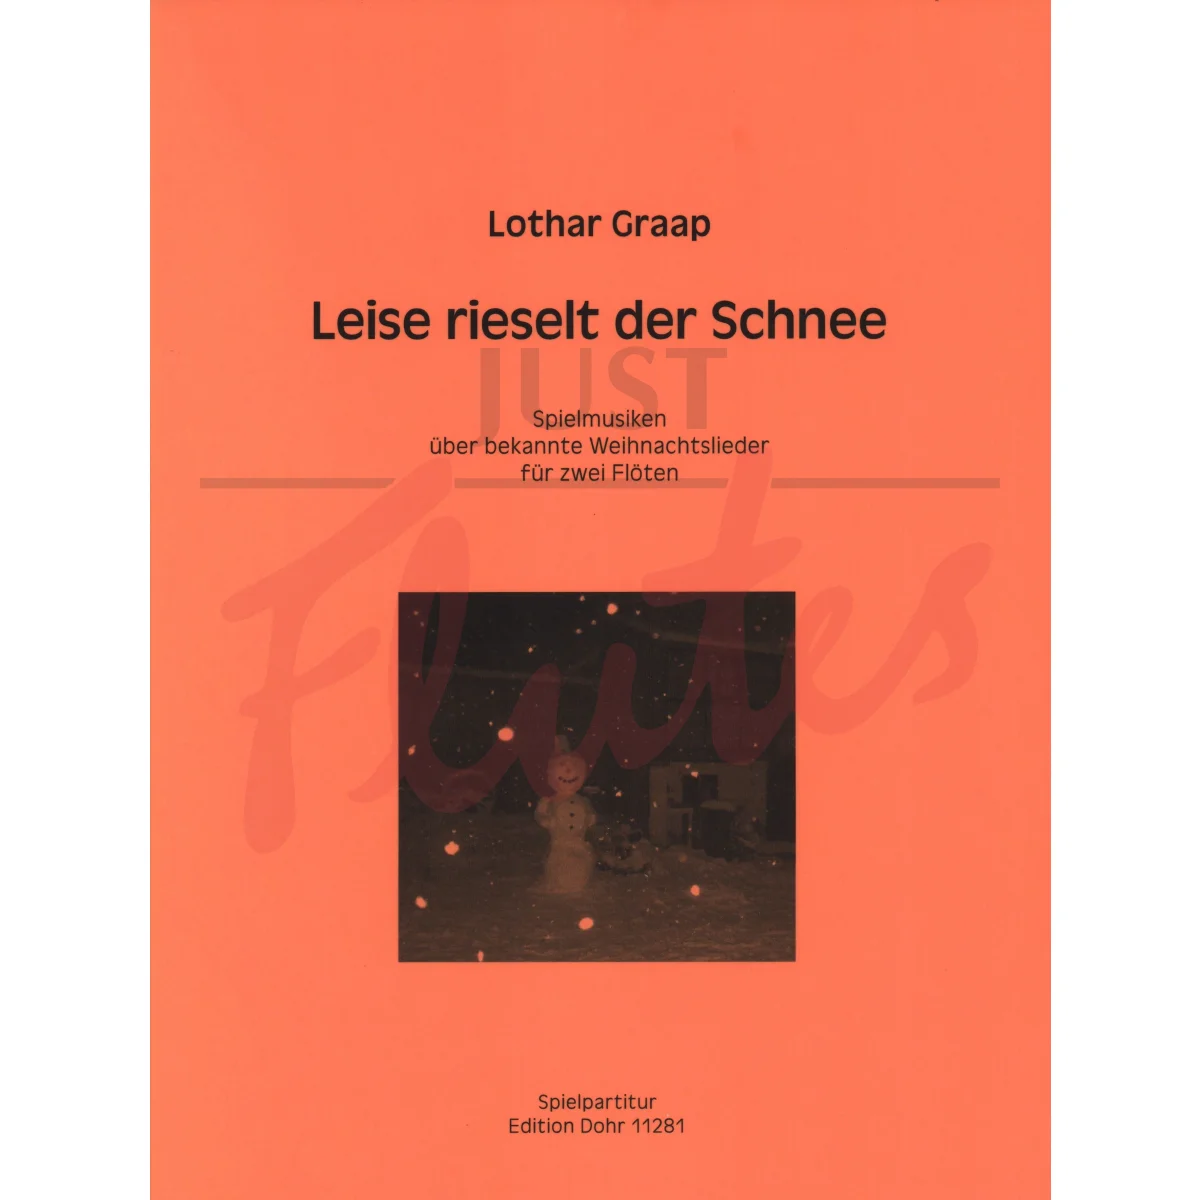 Leise rieselt der Schnee (The Snow Softly Trickles) for Two Flutes